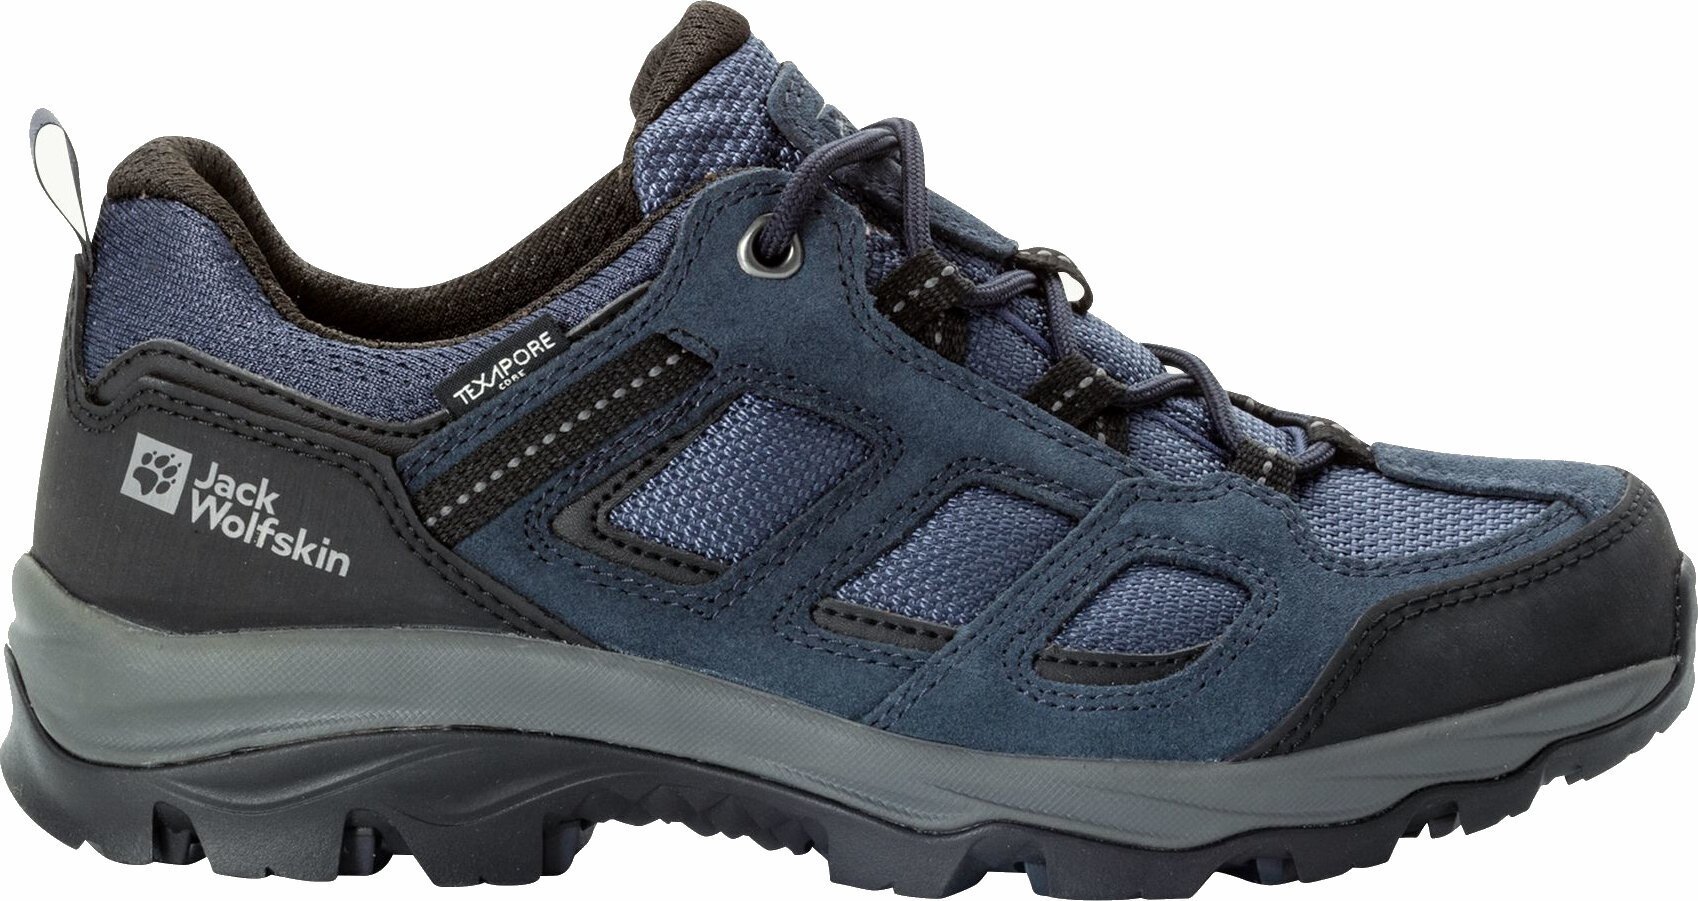 Womens Outdoor Shoes Jack Wolfskin Vojo 3 Texapore Low W Graphite 41 Womens Outdoor Shoes